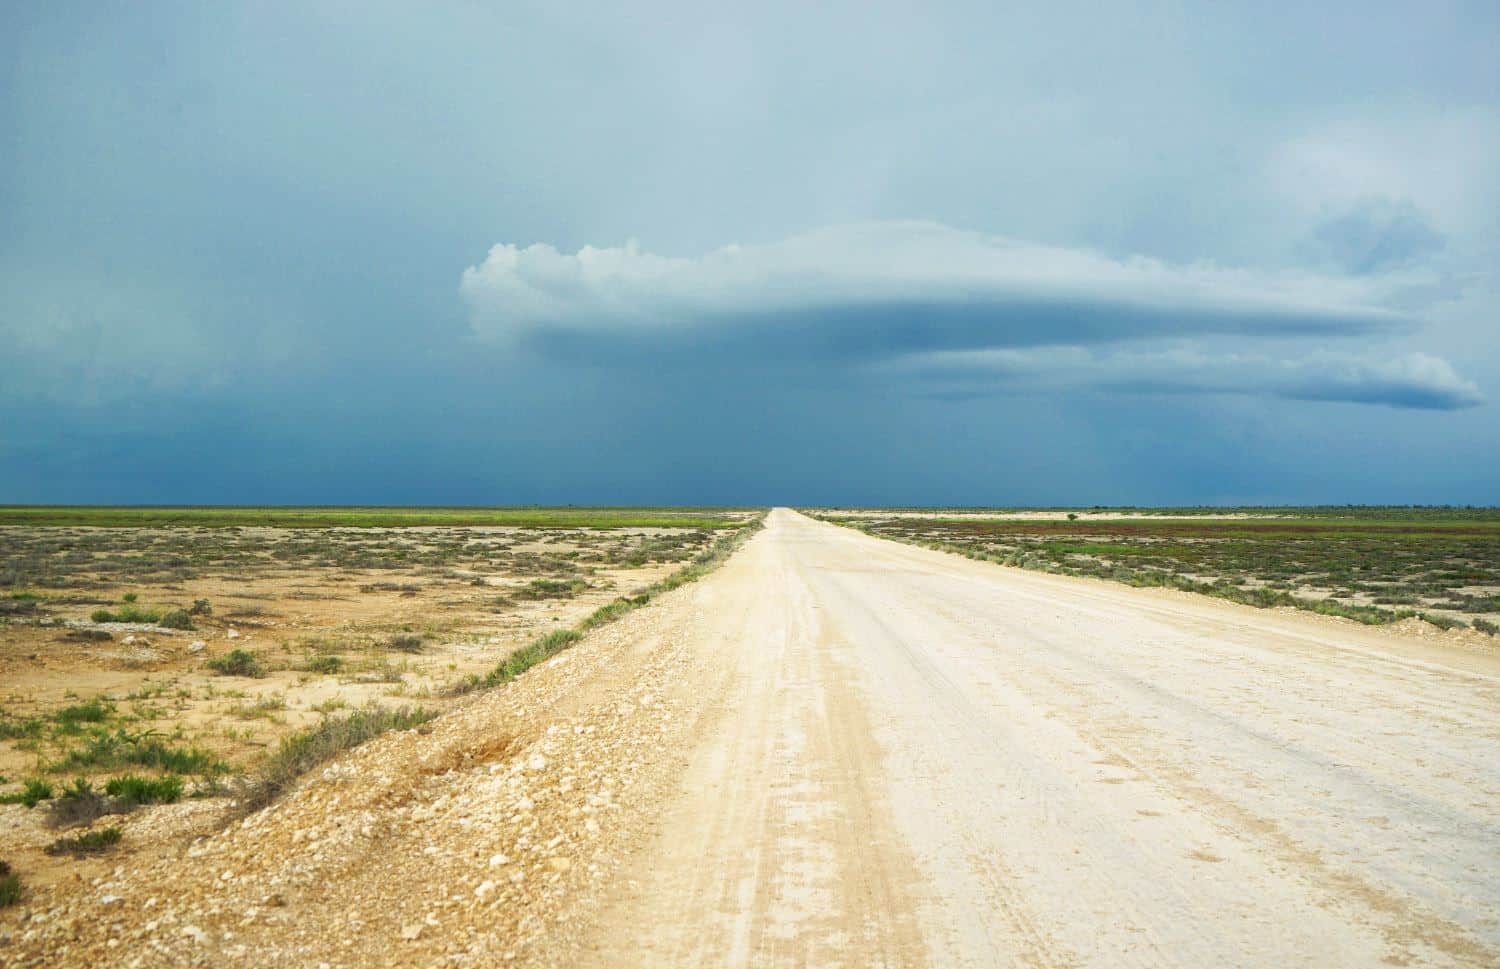 Storm clouds in Etosha National Park